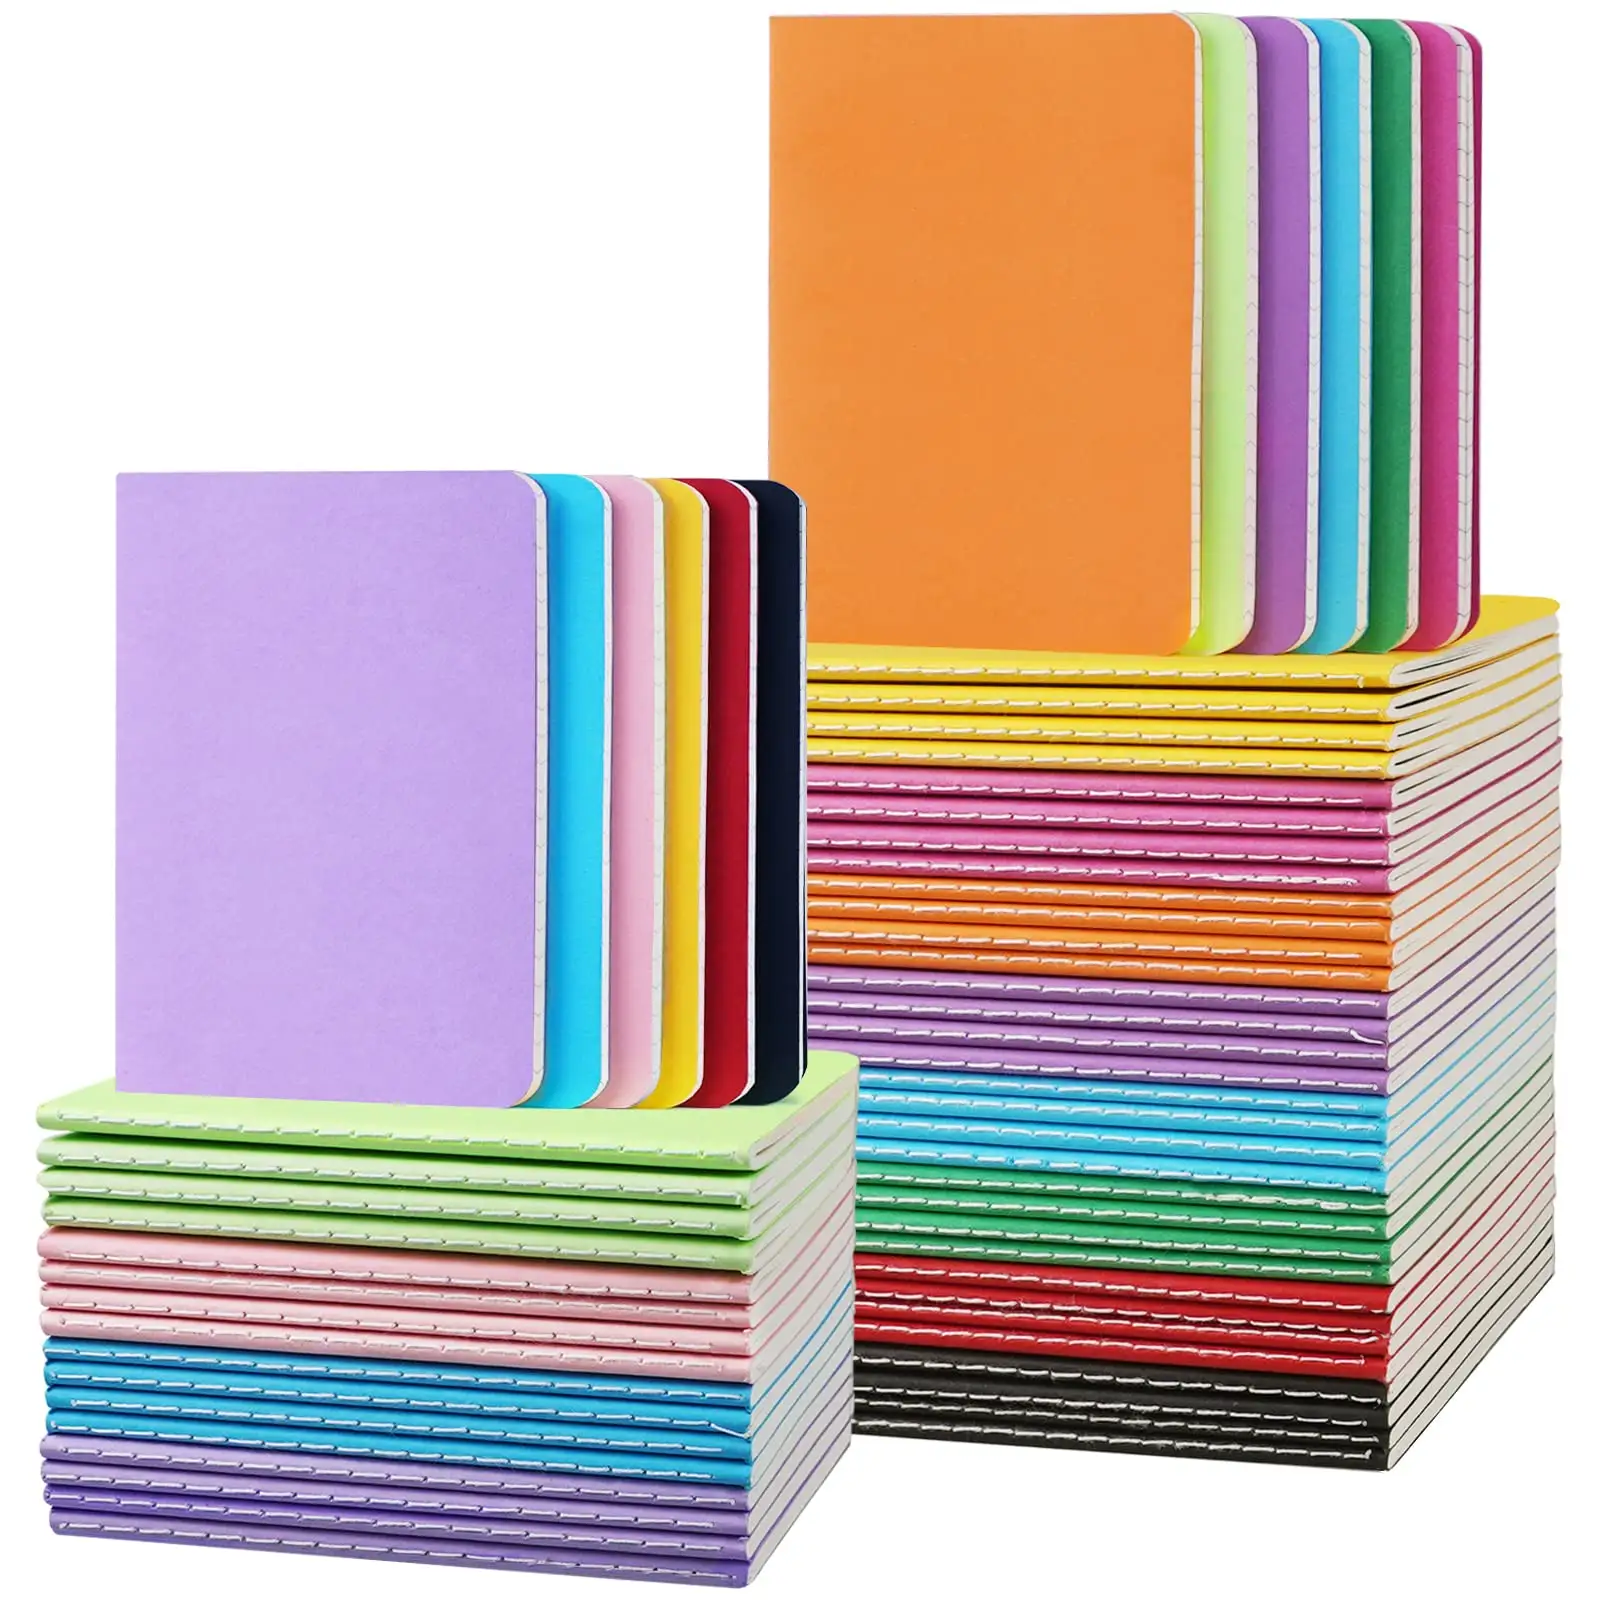 Small Lined Notepads Mini Journal Pocket Notebooks Set Colorful Cover Notebooks for Kids 3.5 x 5.5 Inches